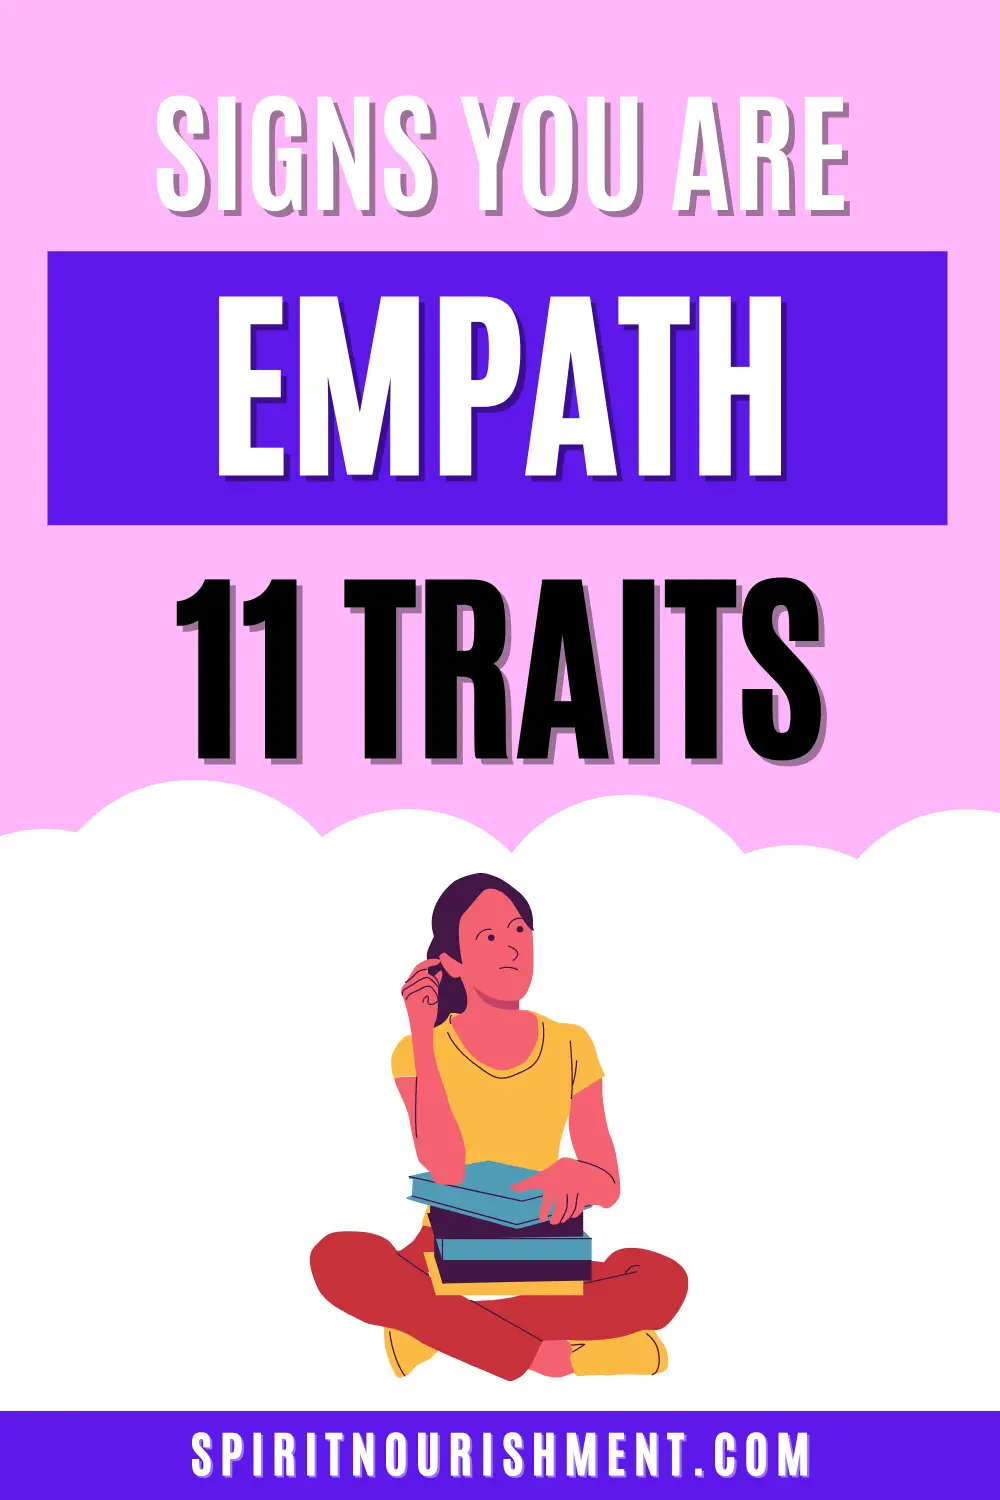 What Is An Empath? Traits & Signs You Are One!